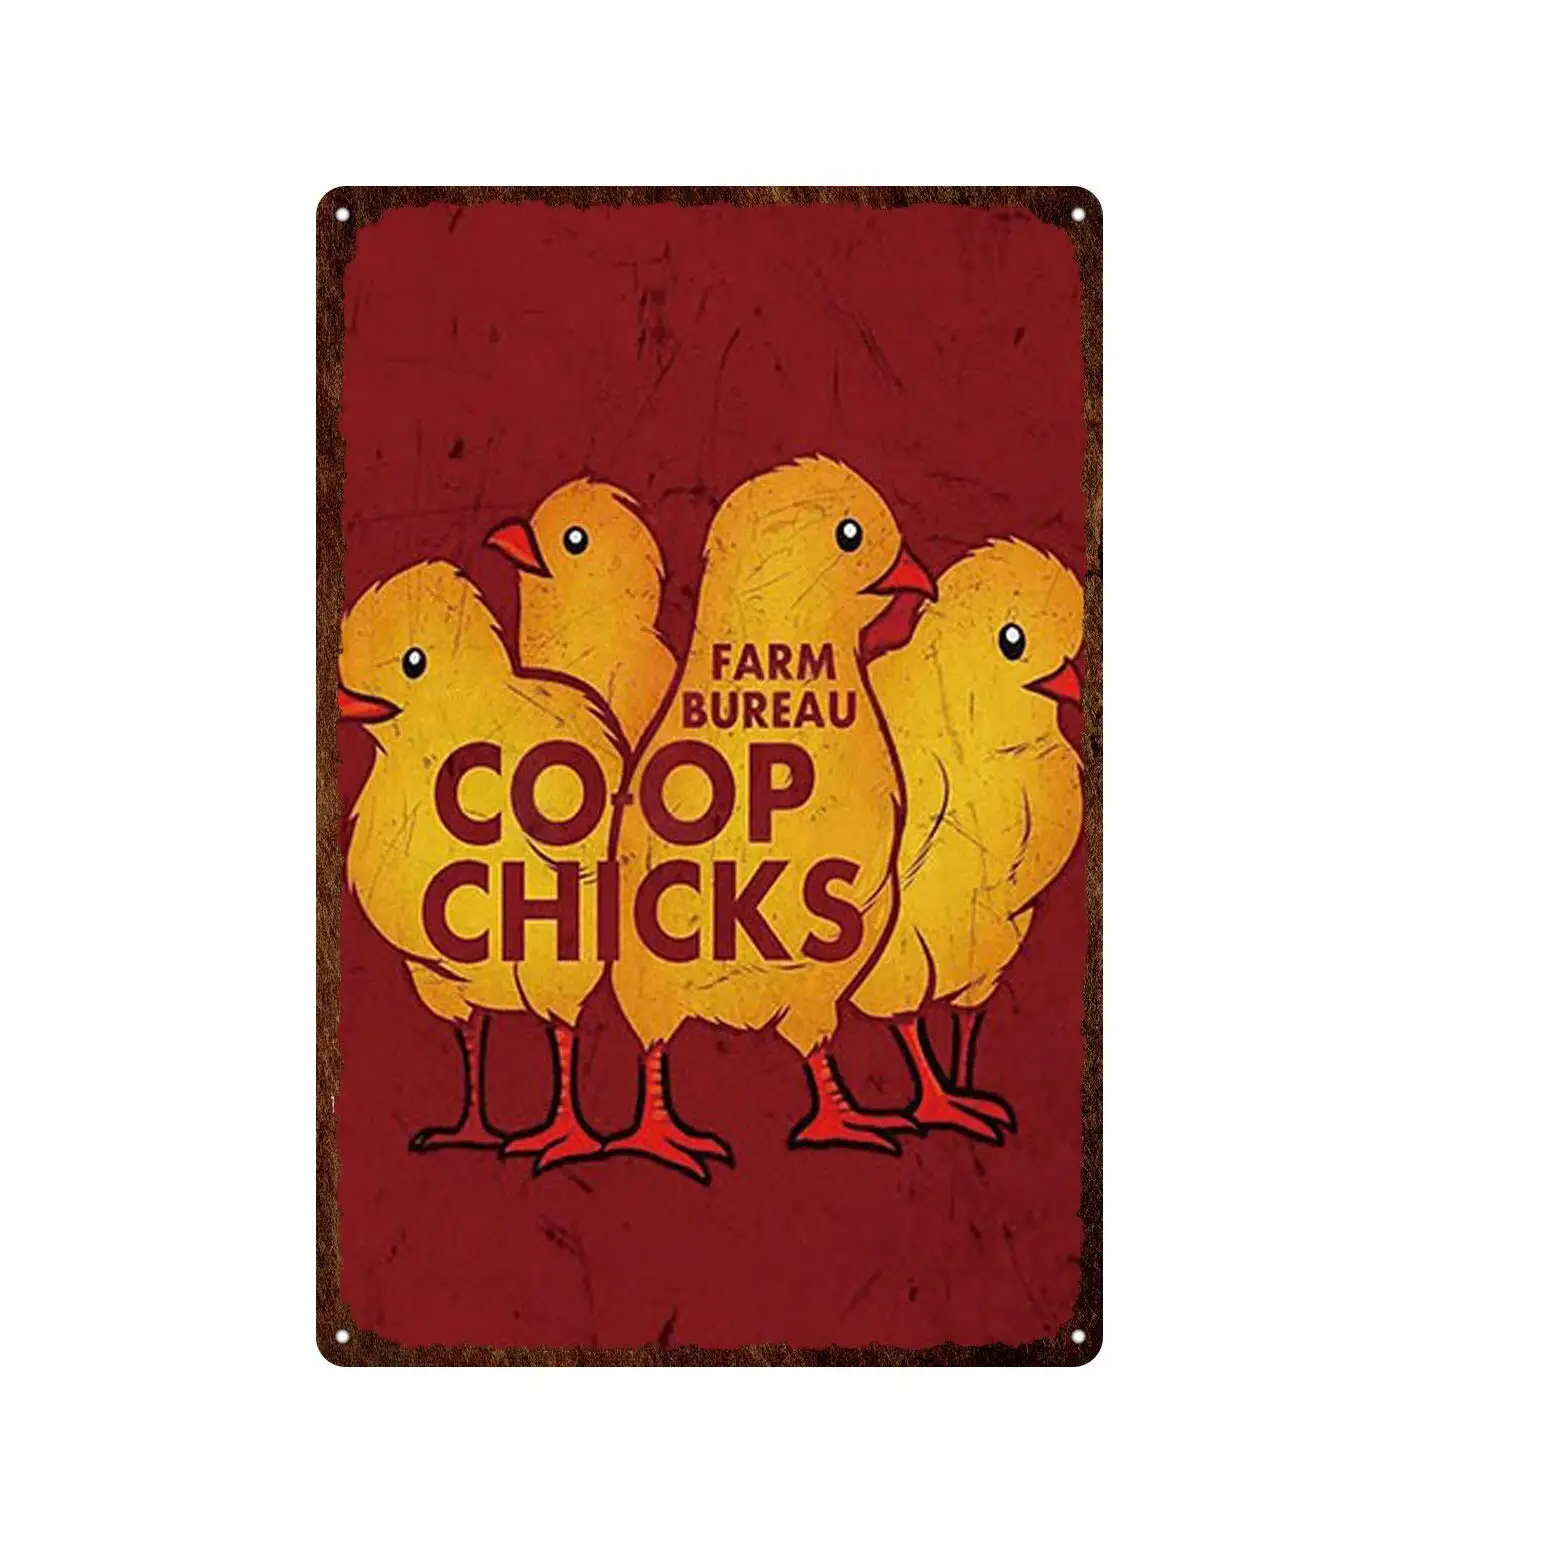 

Art Coop Chick Metal Tin Sign Farm Metal Plate Chicken Coop Shabby Plaque Bar Pub Restaurant Wall Covering Creative Decor Home